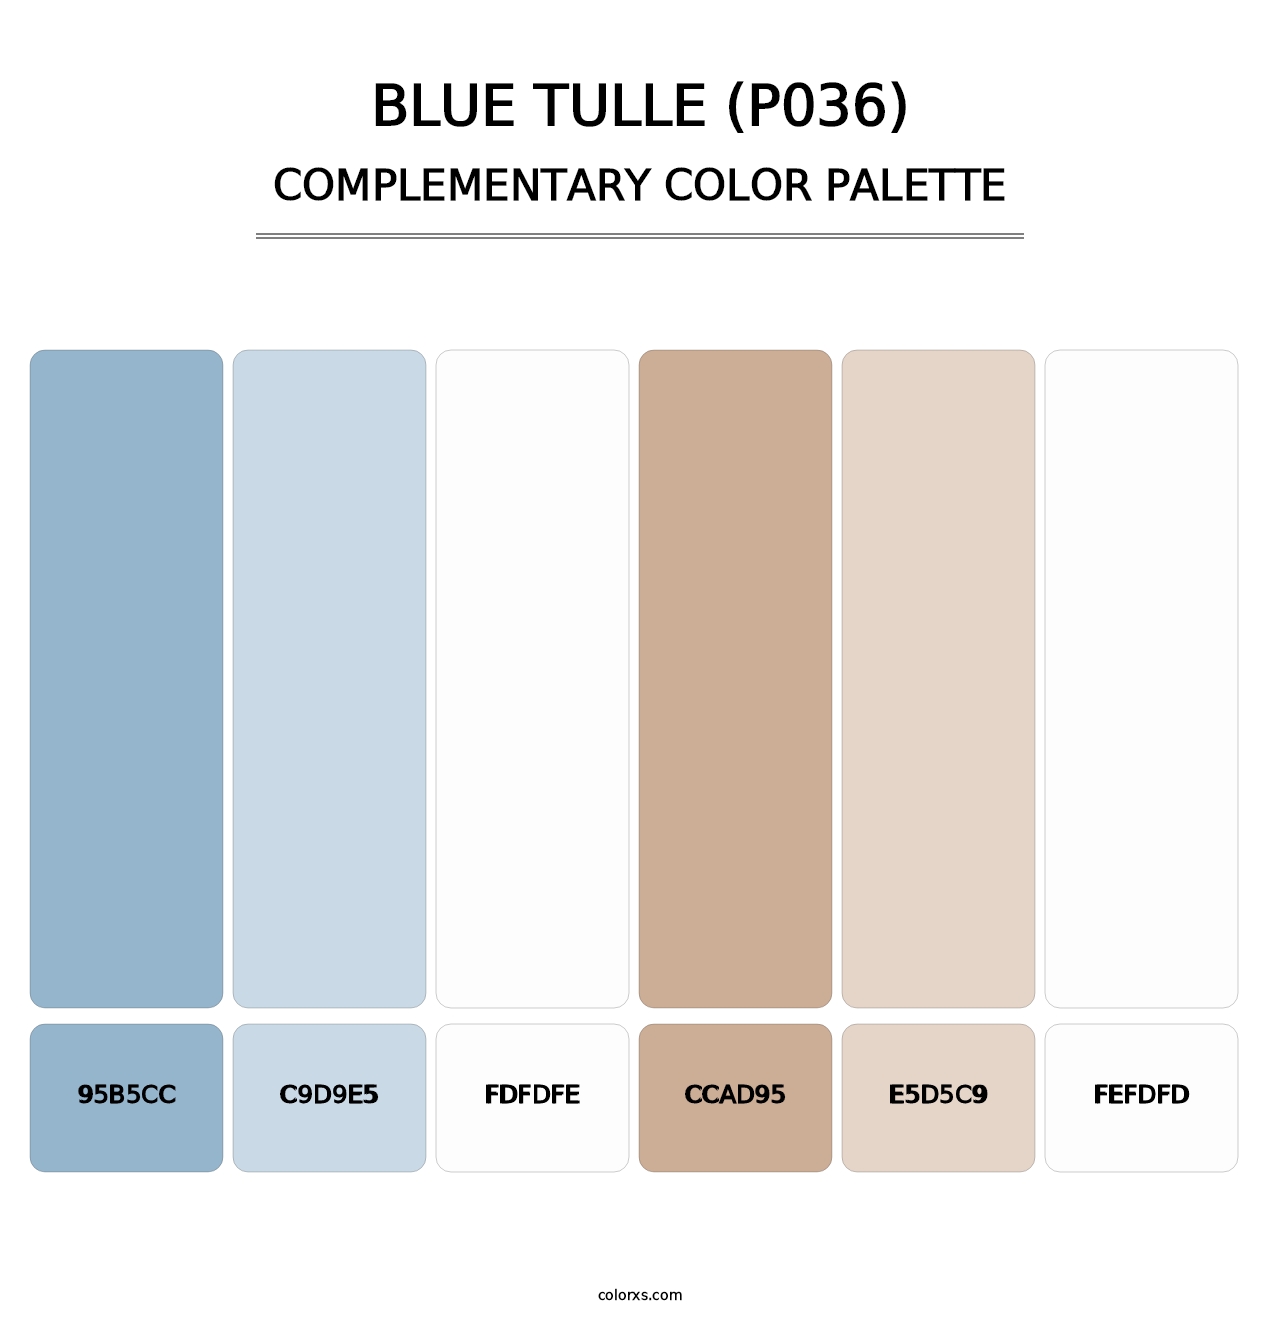 Blue Tulle (P036) - Complementary Color Palette